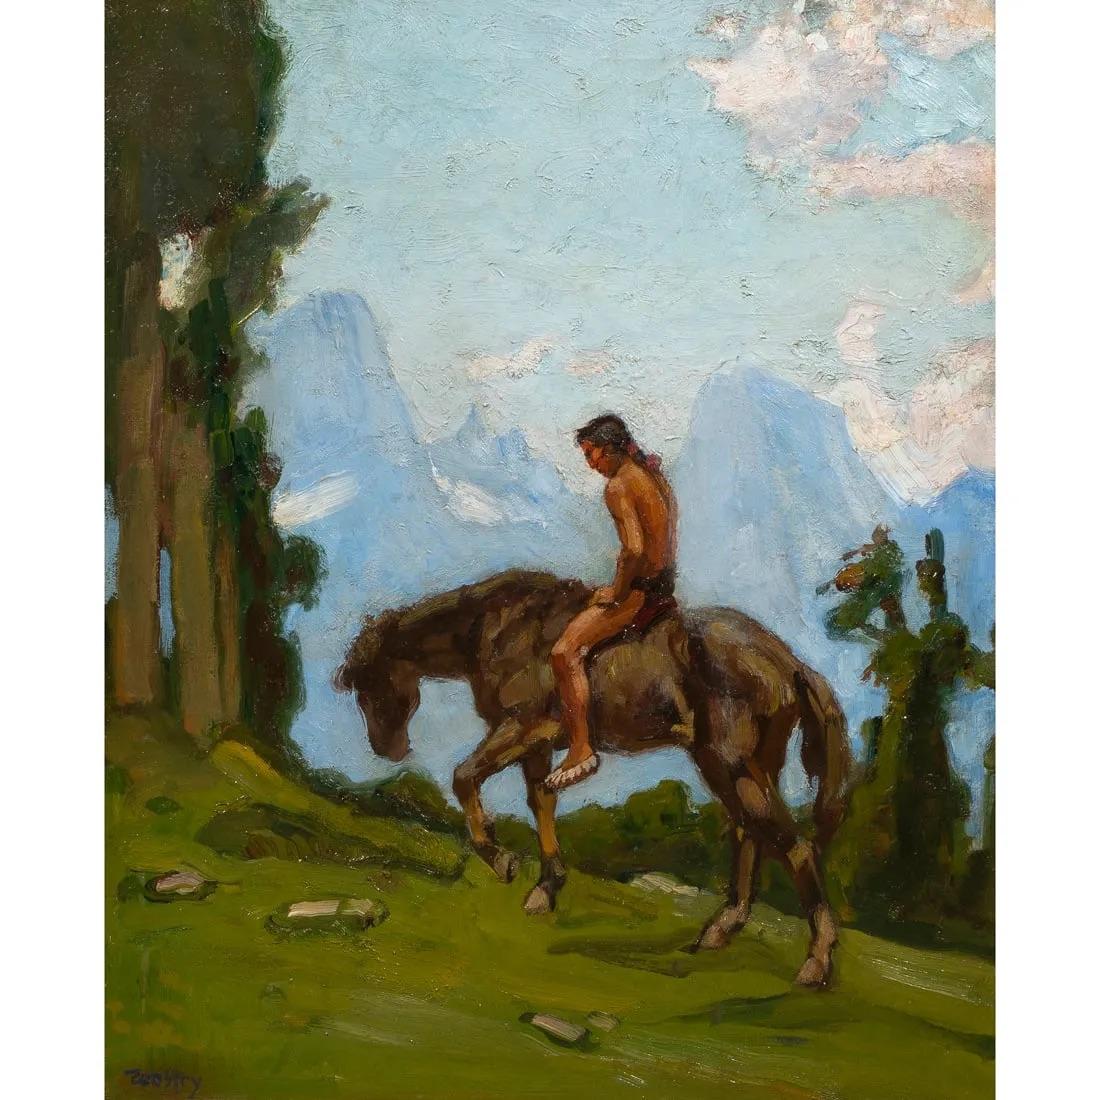 Cario Wostry (Austrian, 1865-1943), Indian on Horseback, oil on canvas affixed to board, signed lower left, board: 24